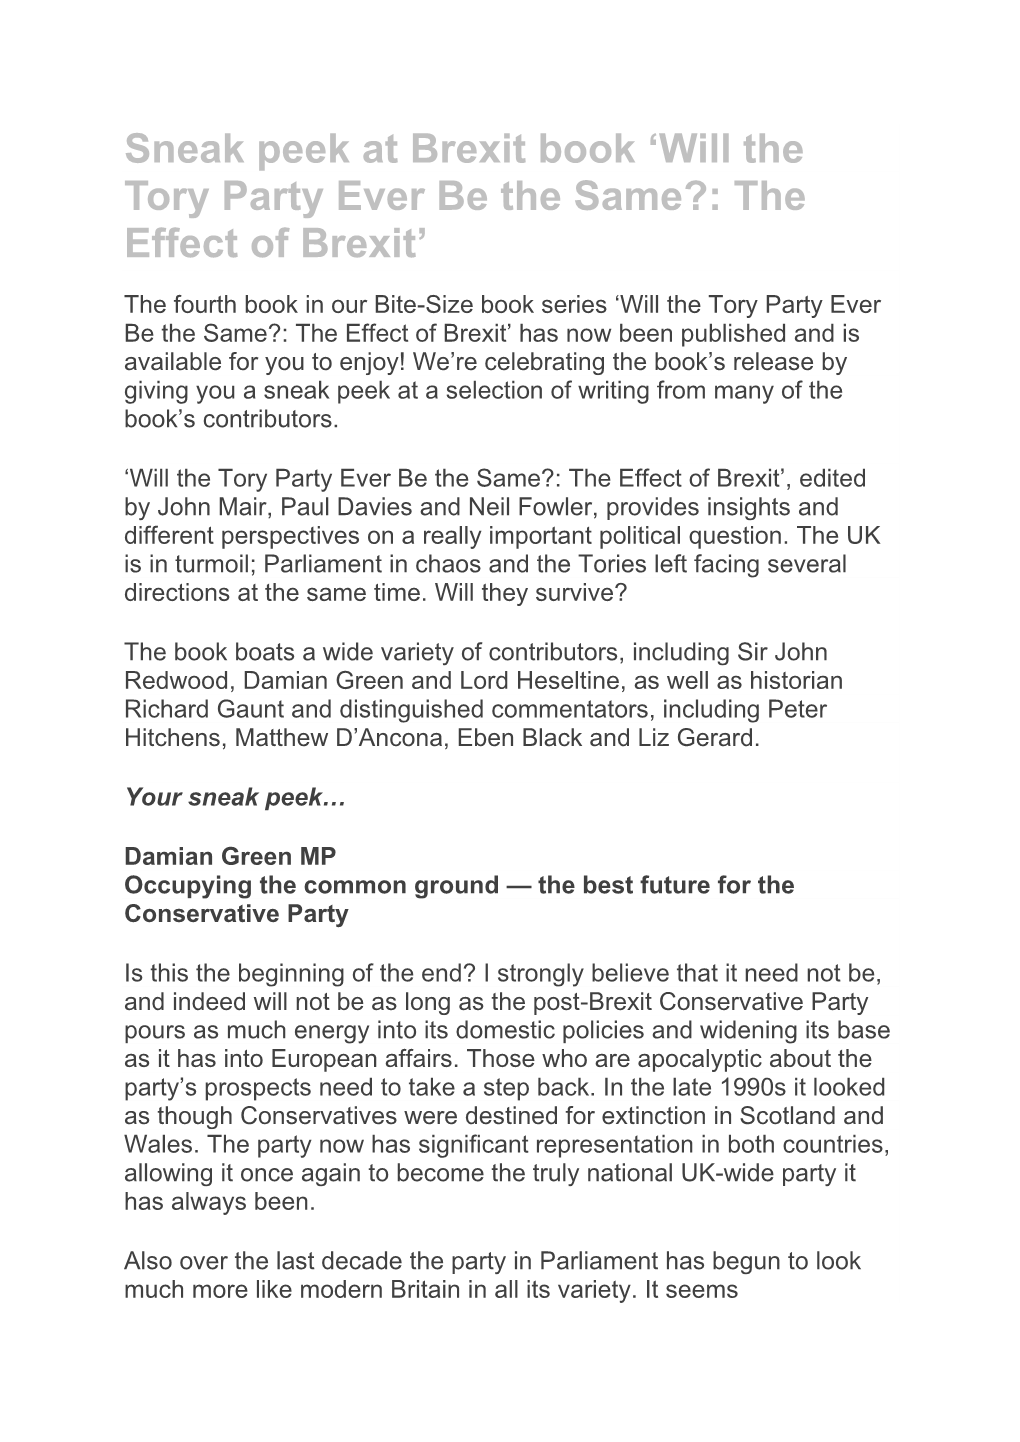 Sneak Peek at Brexit Book 'Will the Tory Party Ever Be the Same?: The